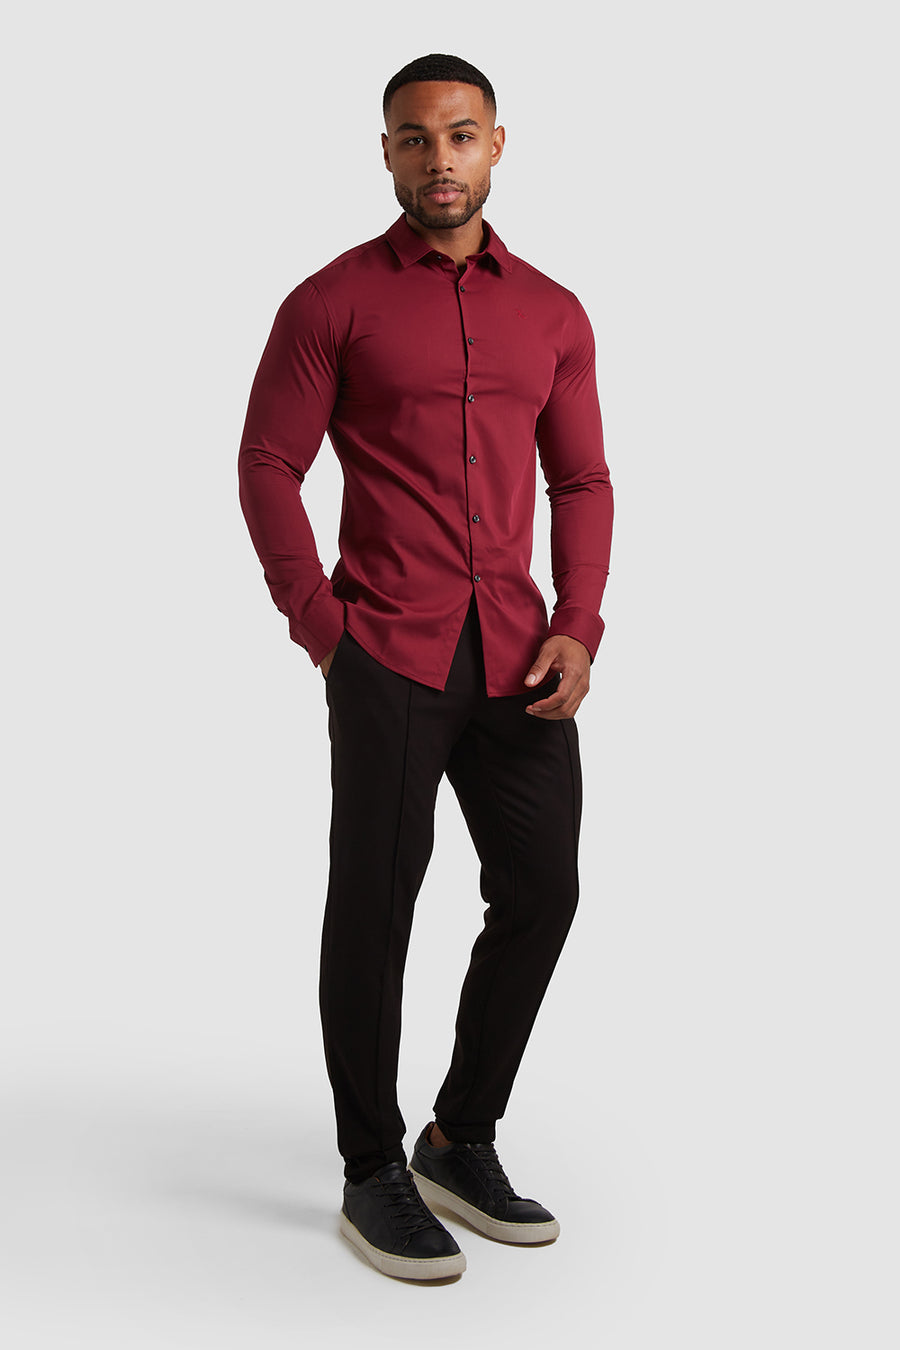 Bamboo Shirt in Claret - TAILORED ATHLETE - USA